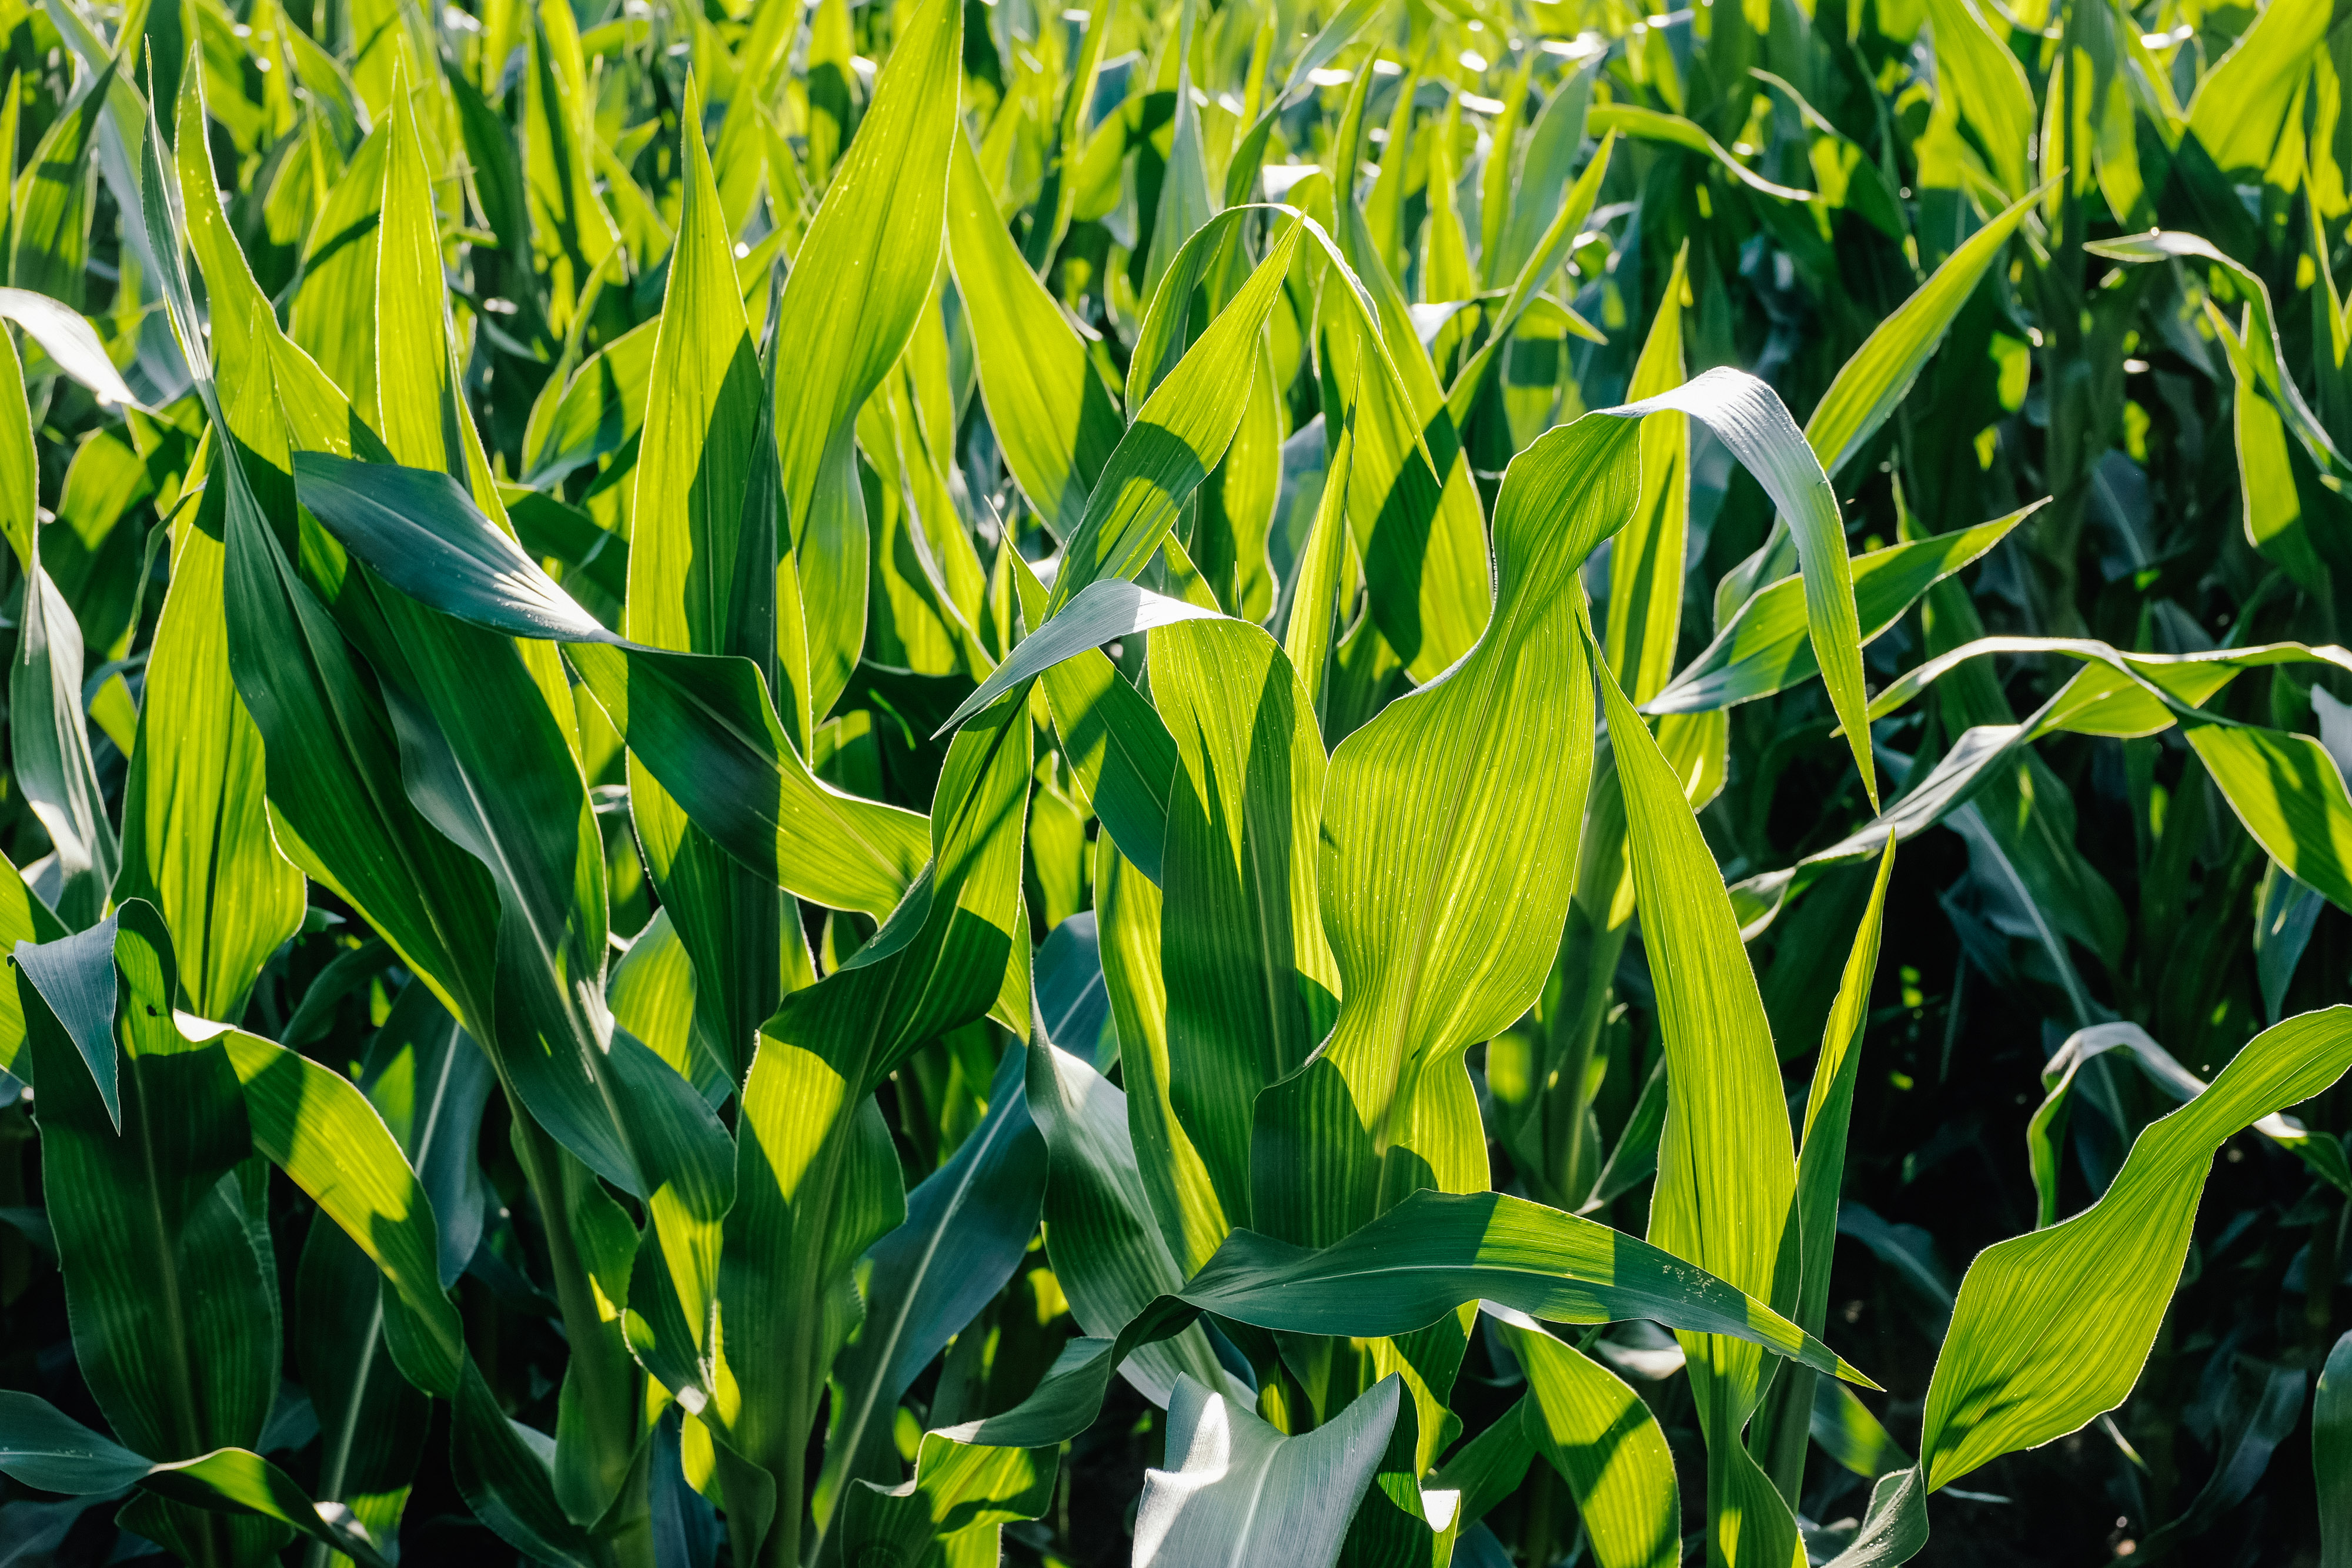 Corn leaves in field free photo on Barnimages